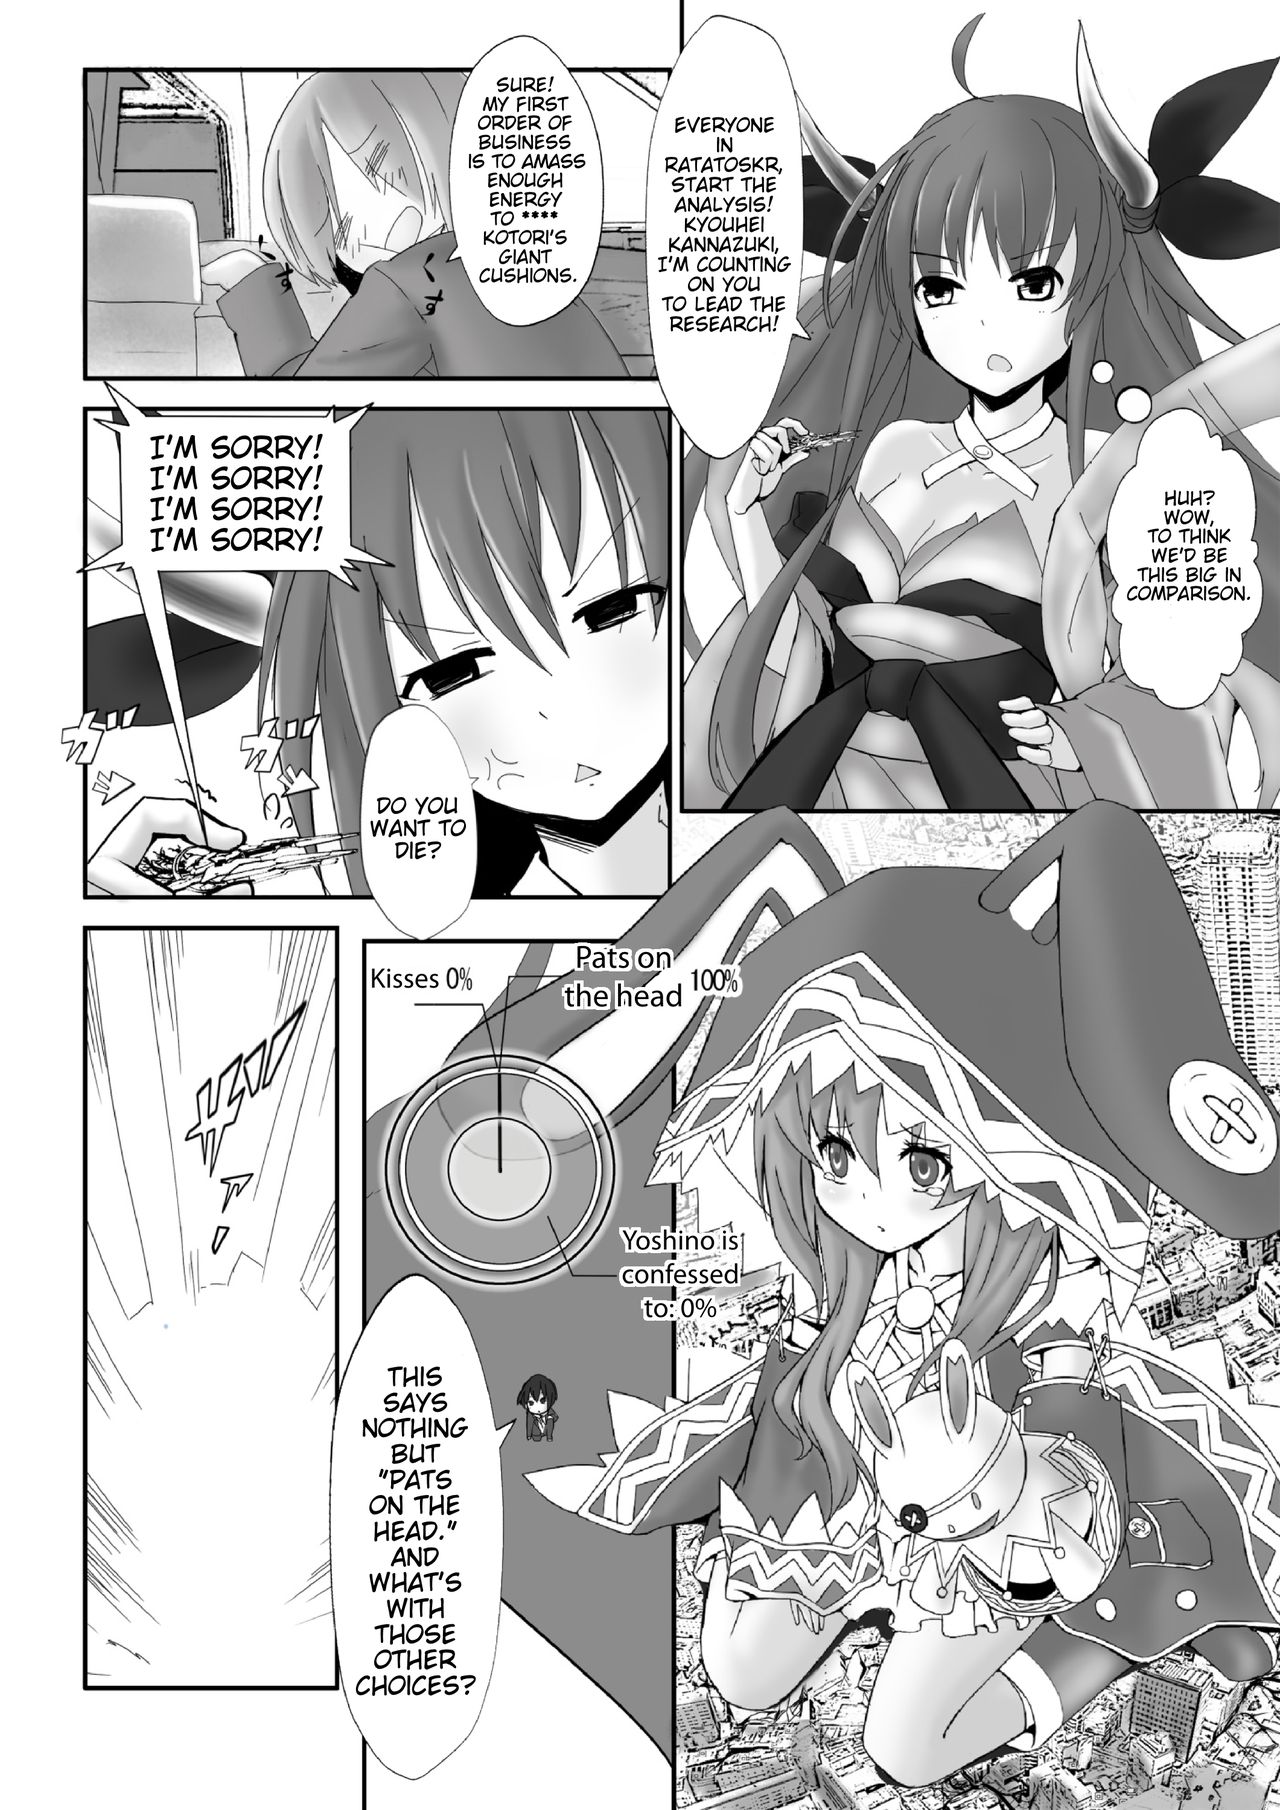 [Kazan no You] Date a Titaness (Date A Live) [English] {doujin-moe.us} [火山の楊] DATE A TITANESS (デート・ア・ライブ) [英訳]